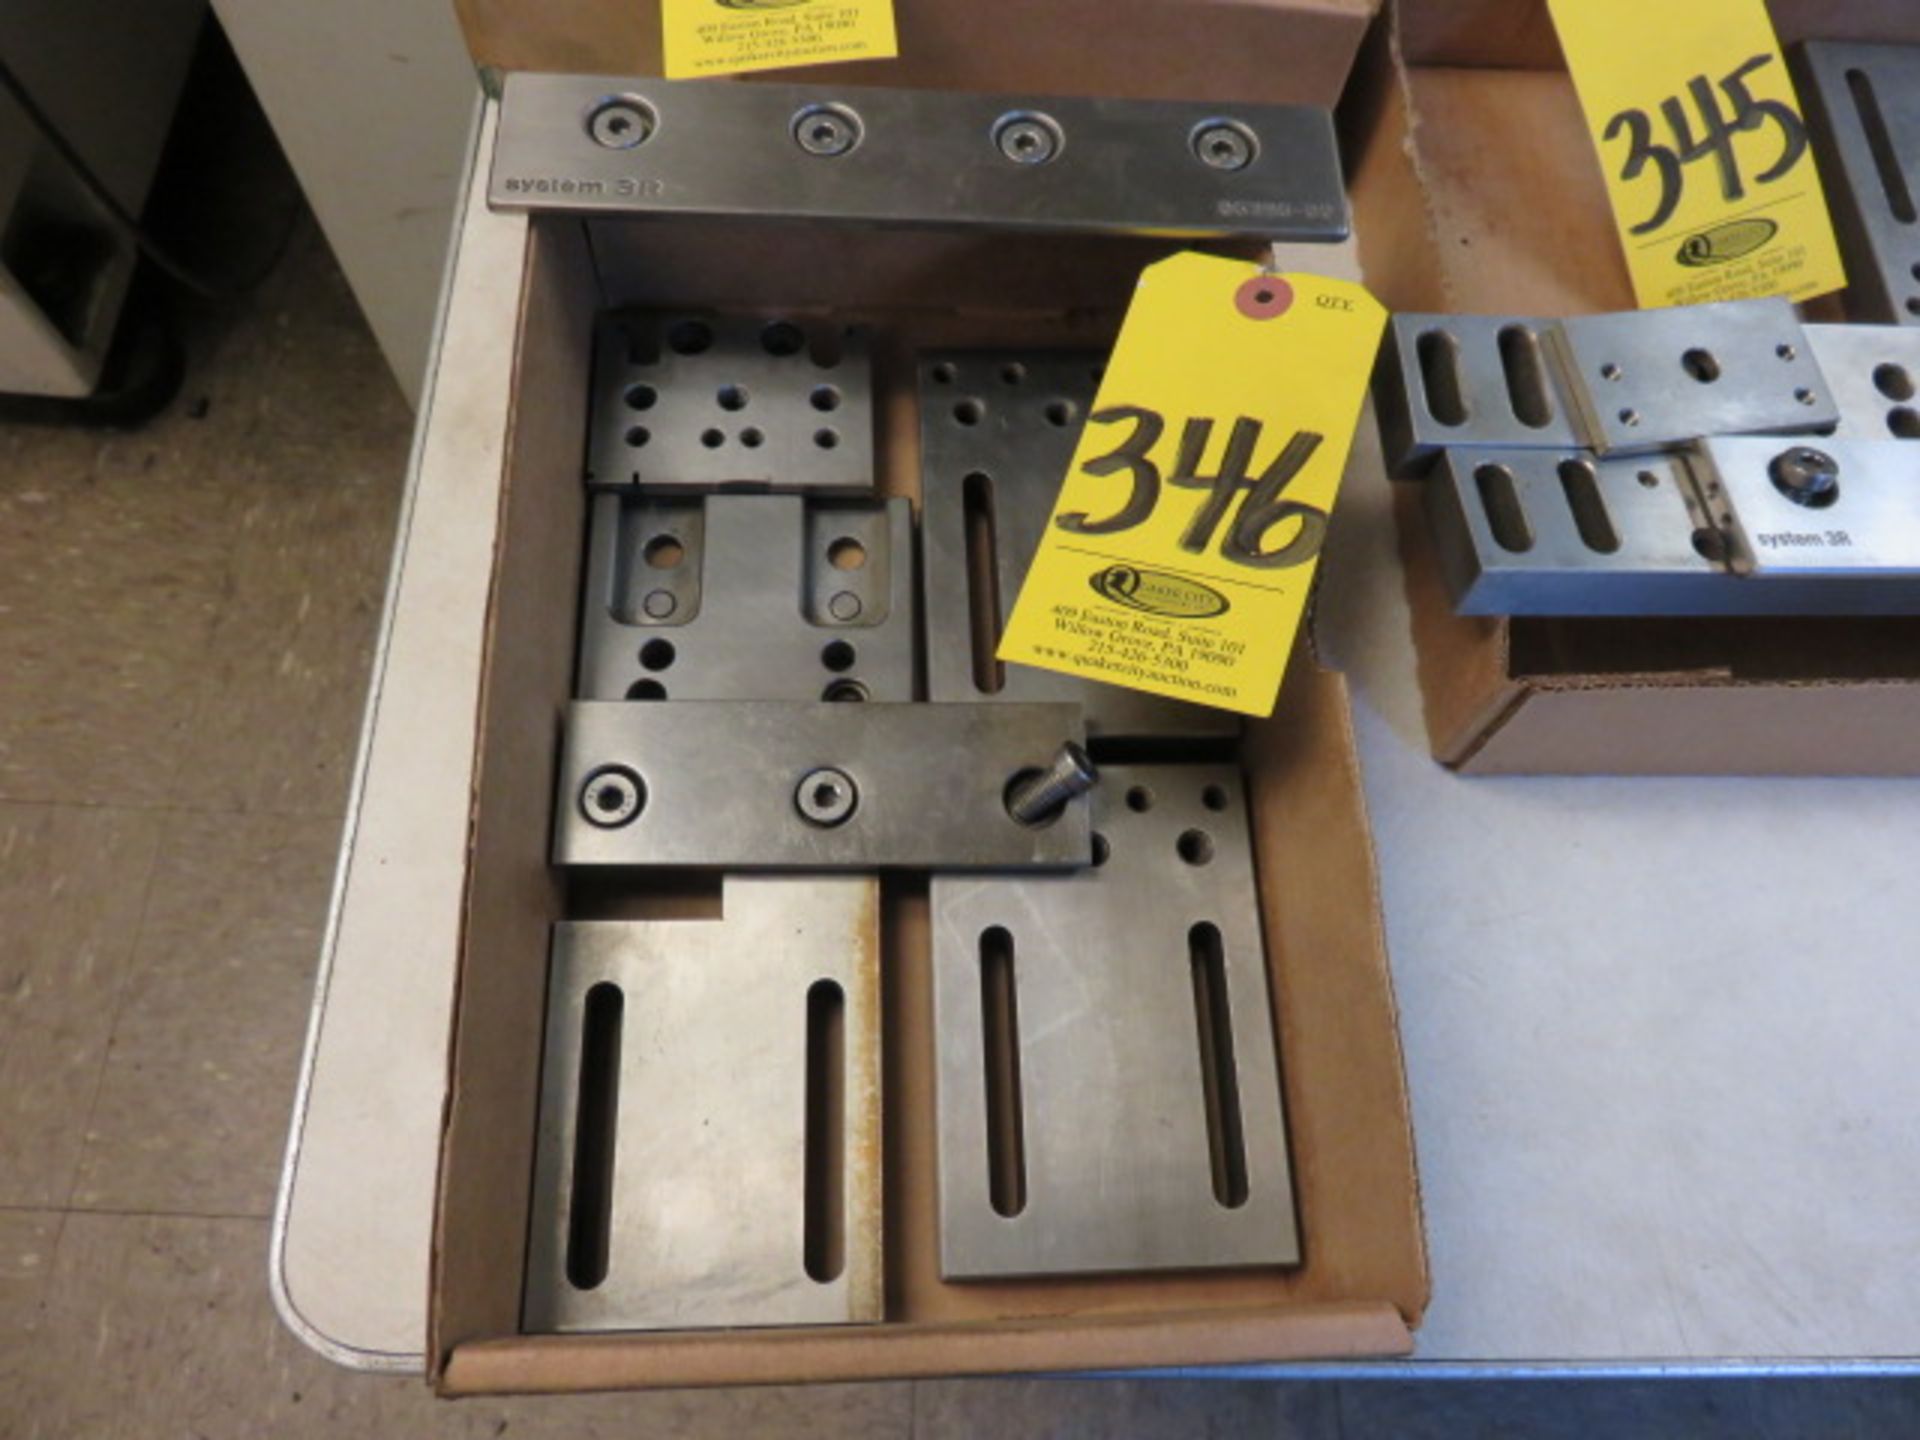 3R 06396-00 AND MISCELLANEOUS PRECISION TOOL BLOCKS